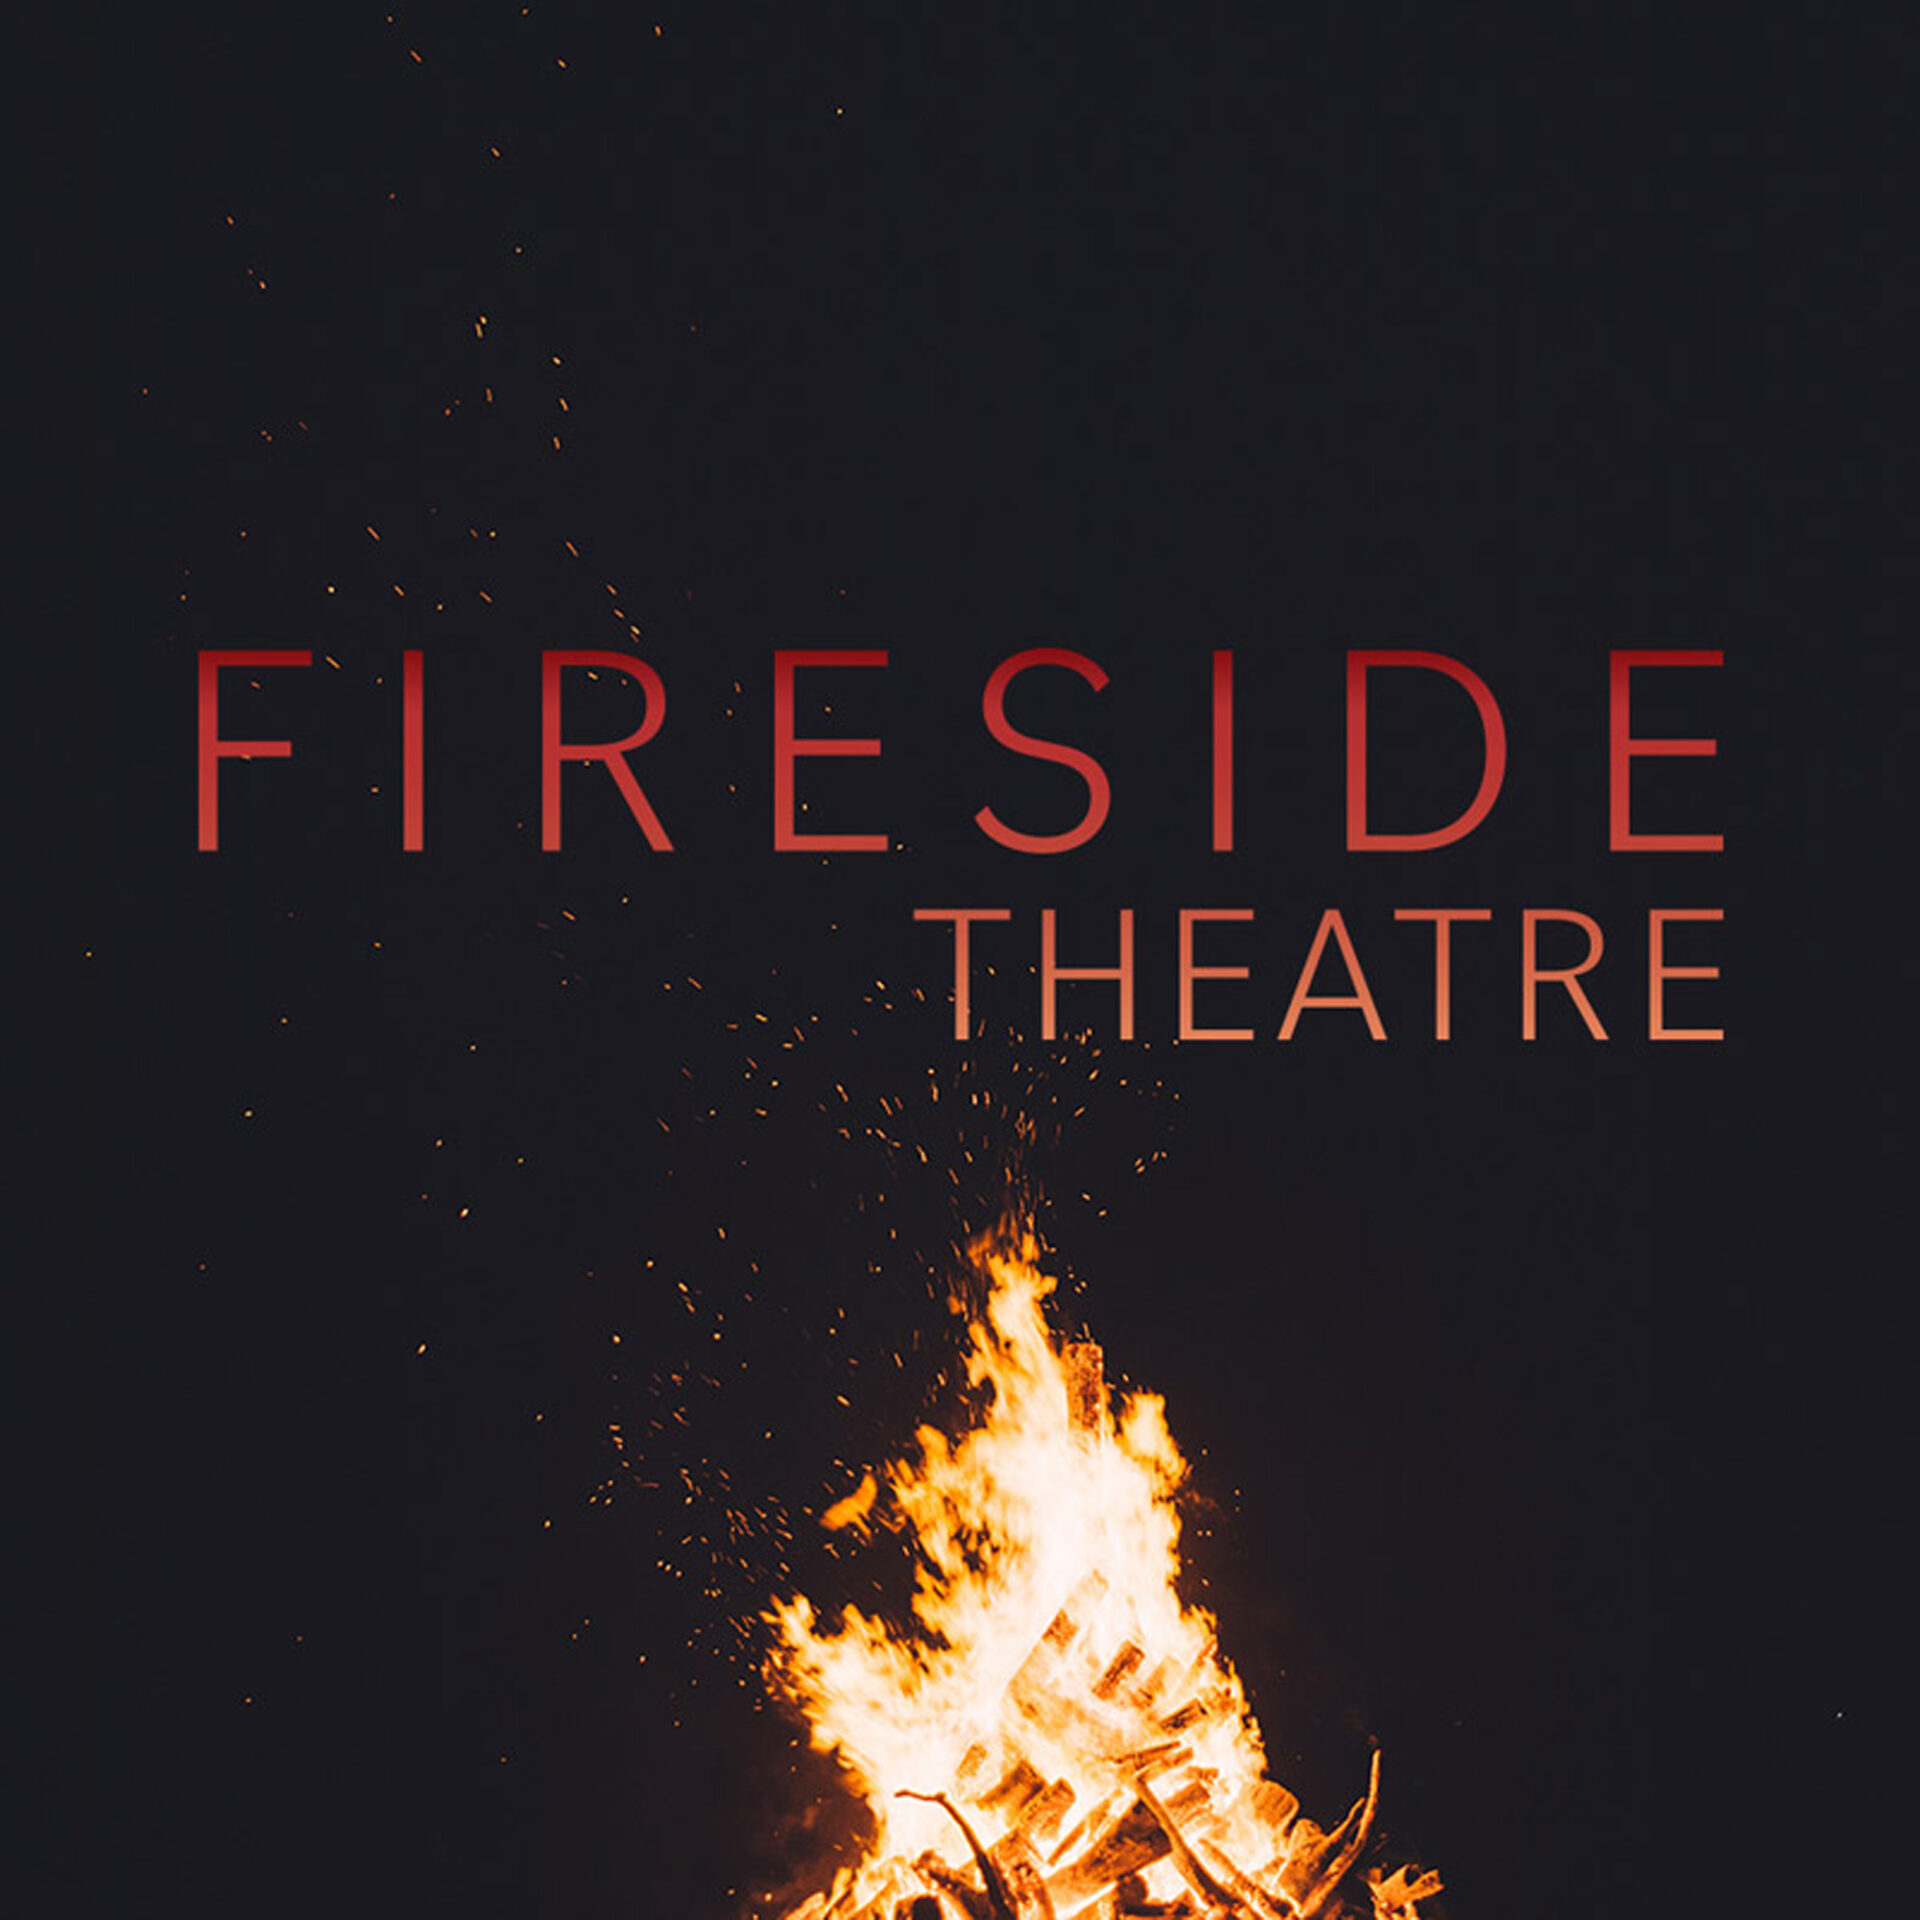 chloe v designs, fireside theatre logo, the logo is on a night sky with a bonfire pictured below it